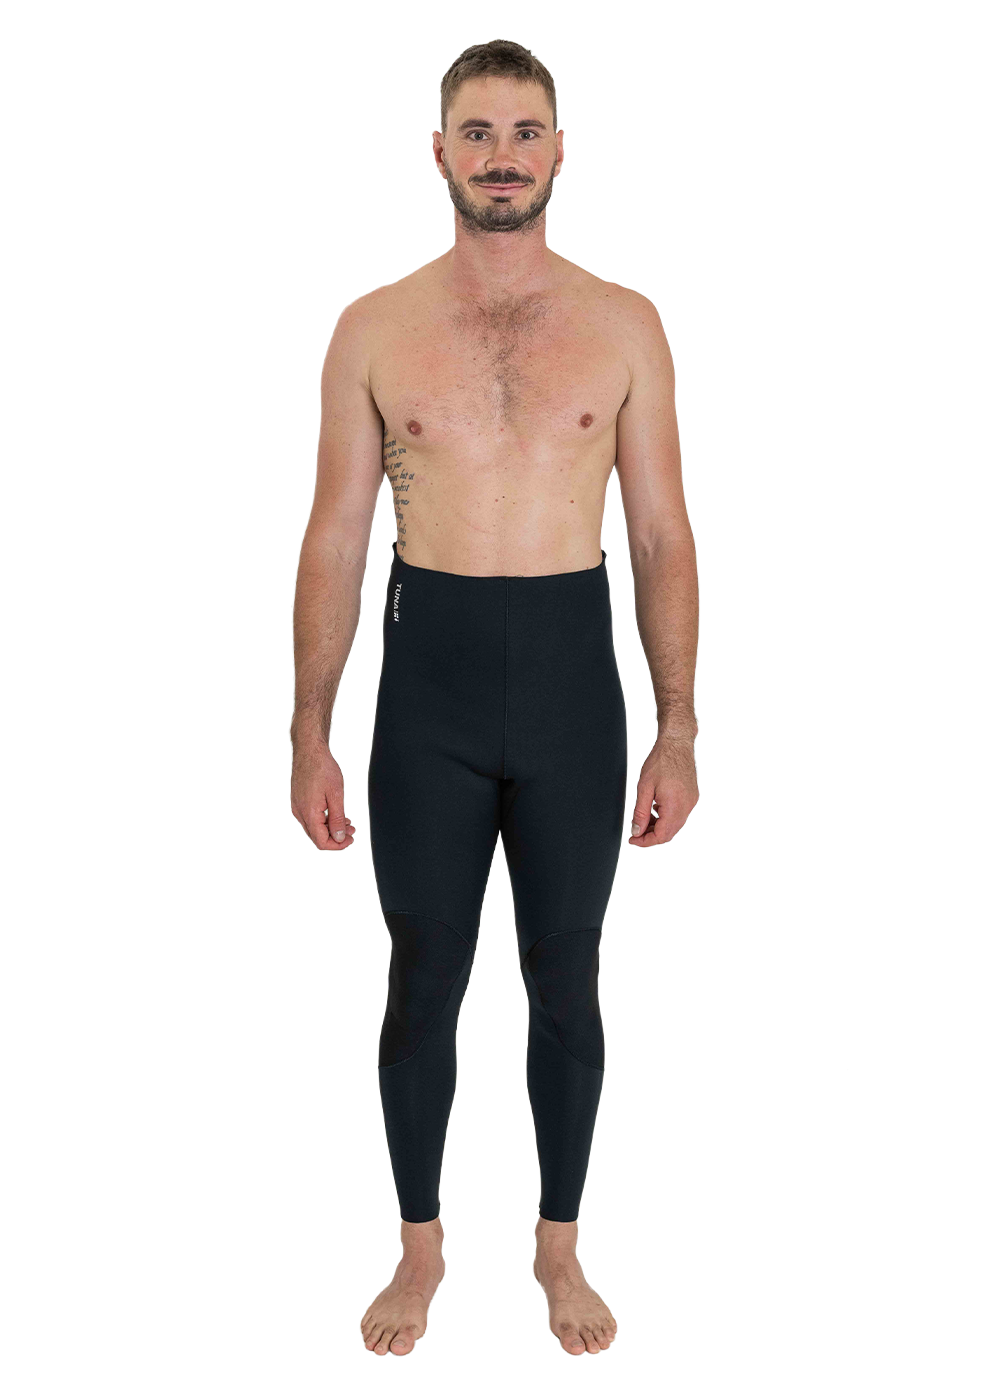 Adreno Tuna 3mm Lined 2 Piece Wetsuit - Adreno - Ocean Outfitters